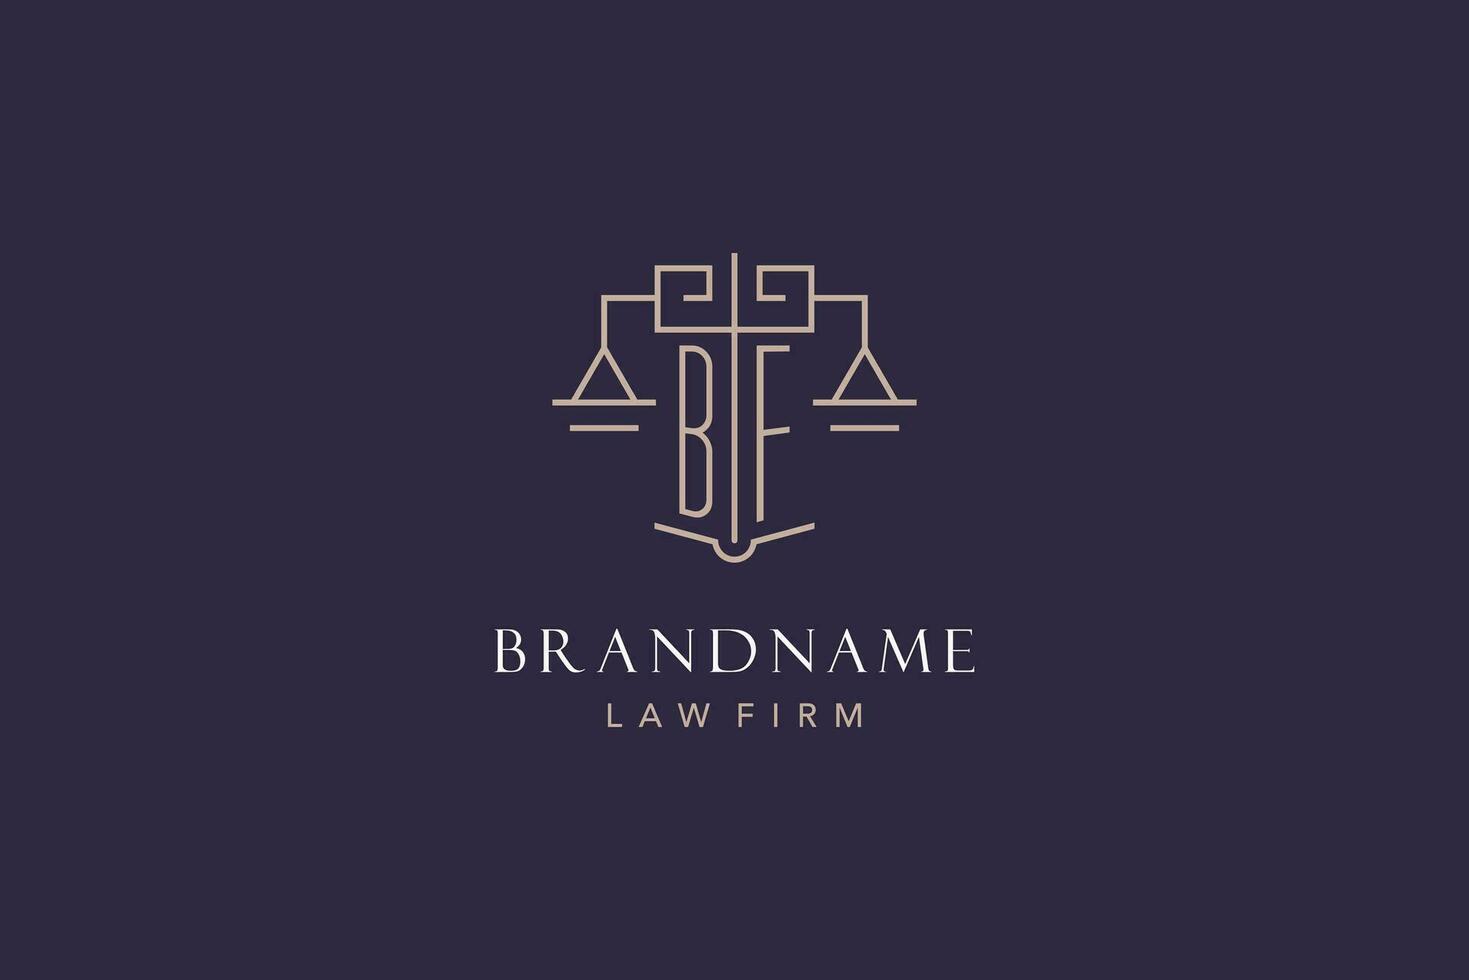 Initial letter BF logo with scale of justice logo design, luxury legal logo geometric style vector